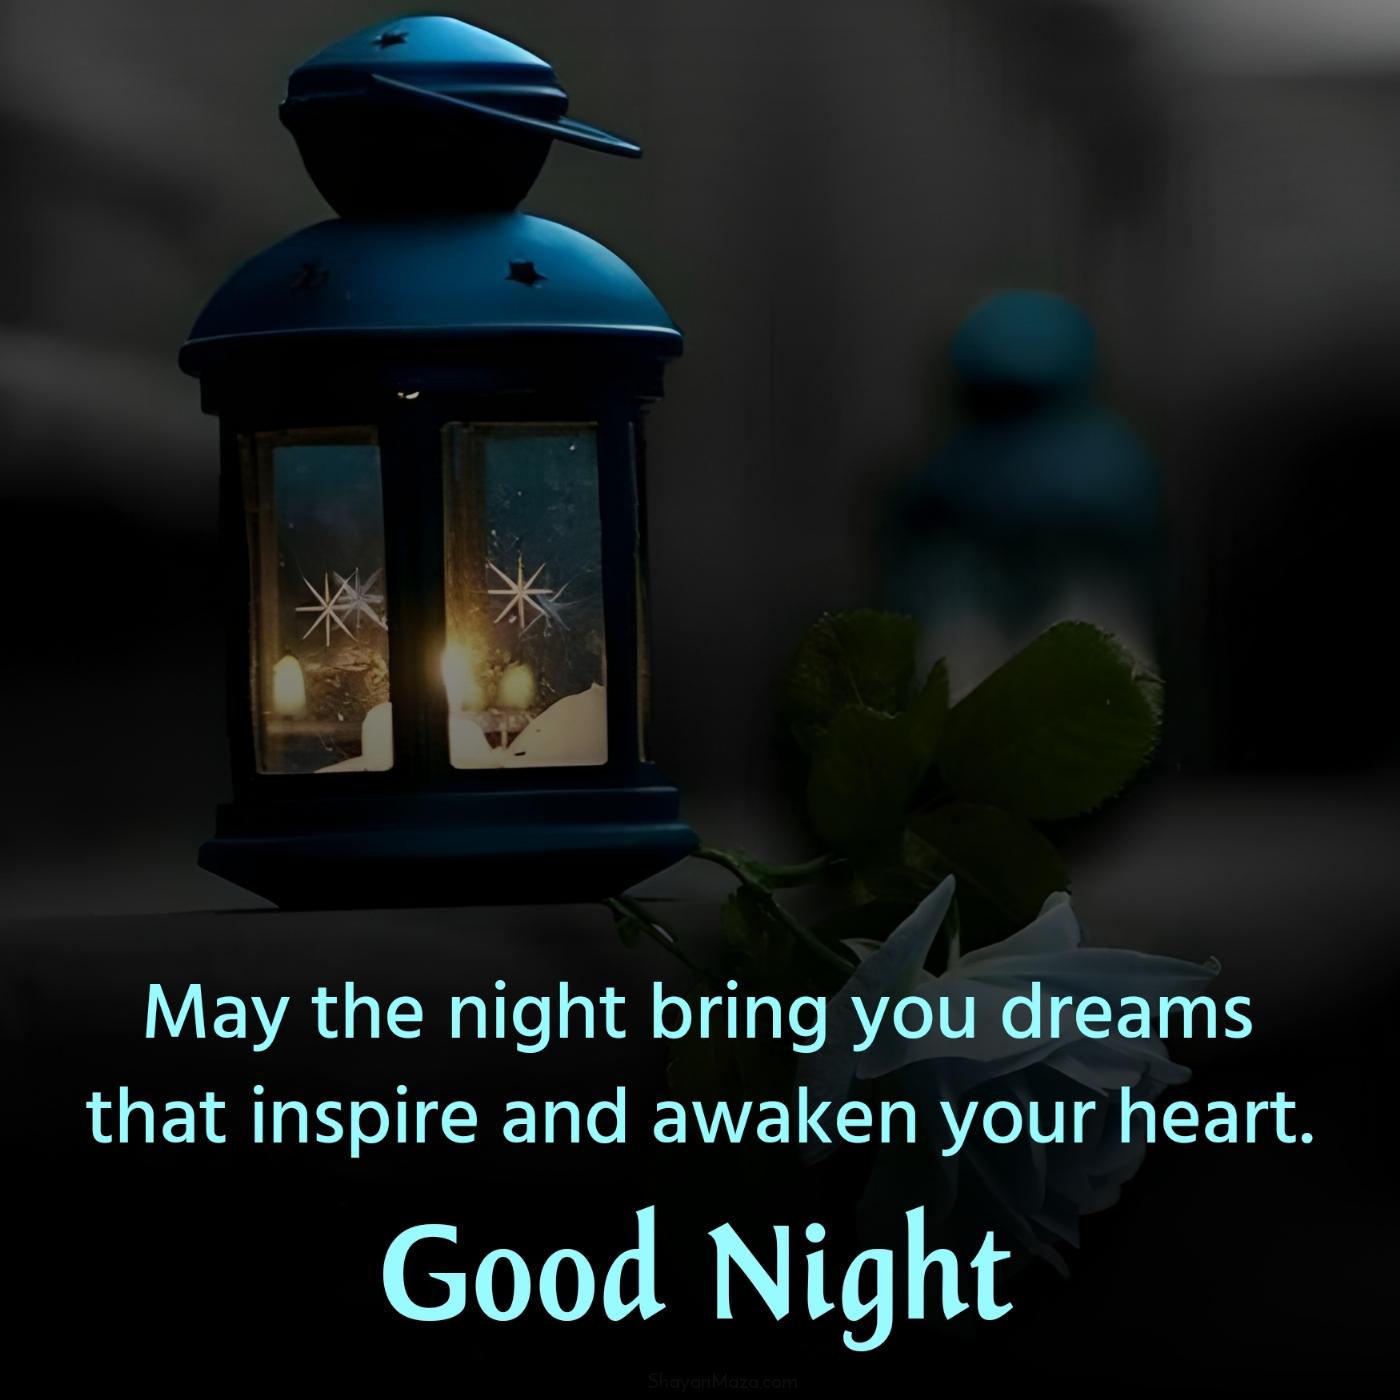 May the night bring you dreams that inspire